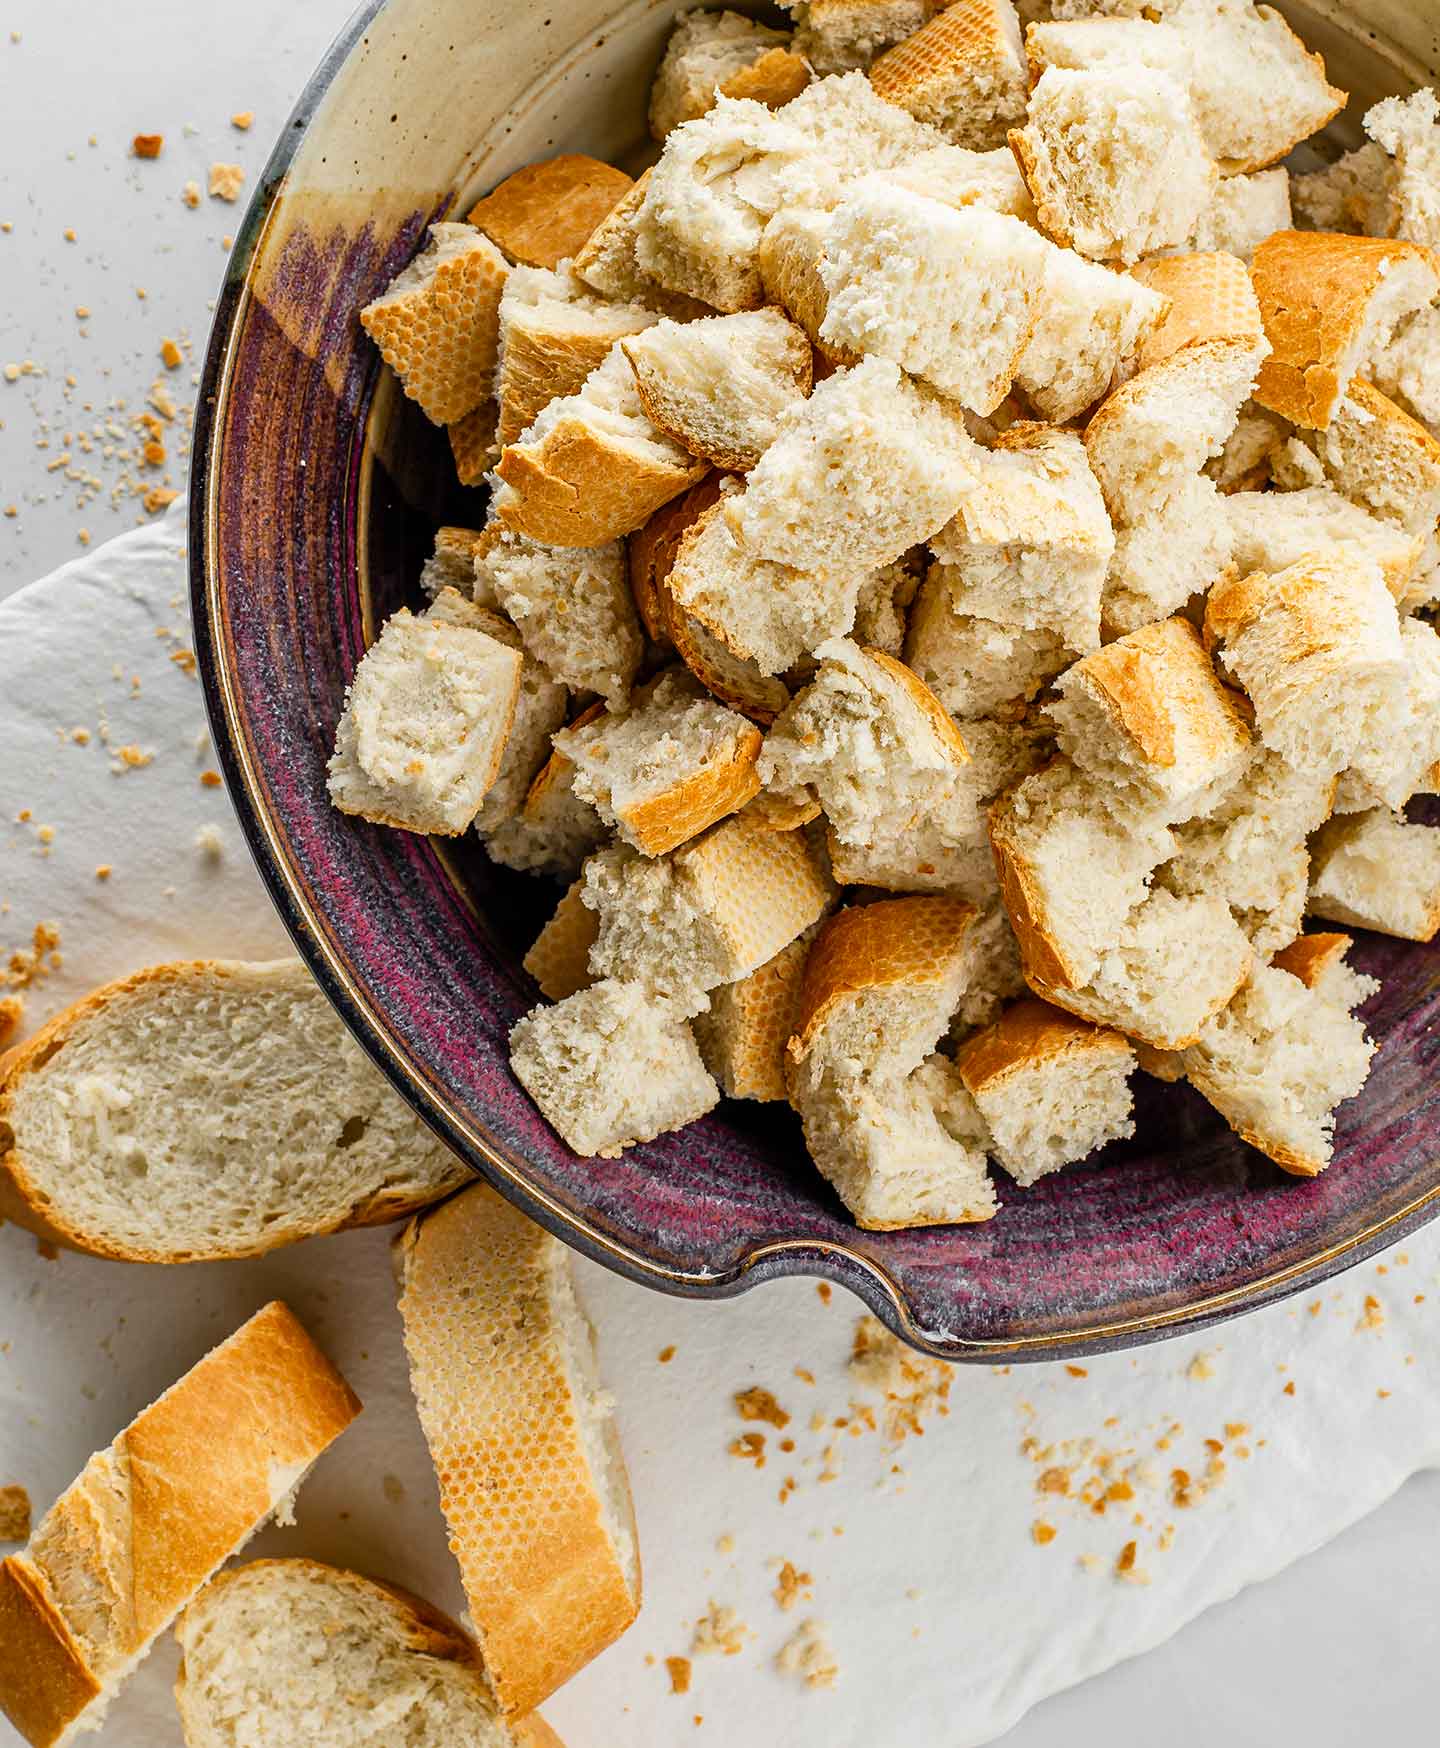 Diced bread in a ceramic bowl with breadcrumbs and sliced baguette scattered around it